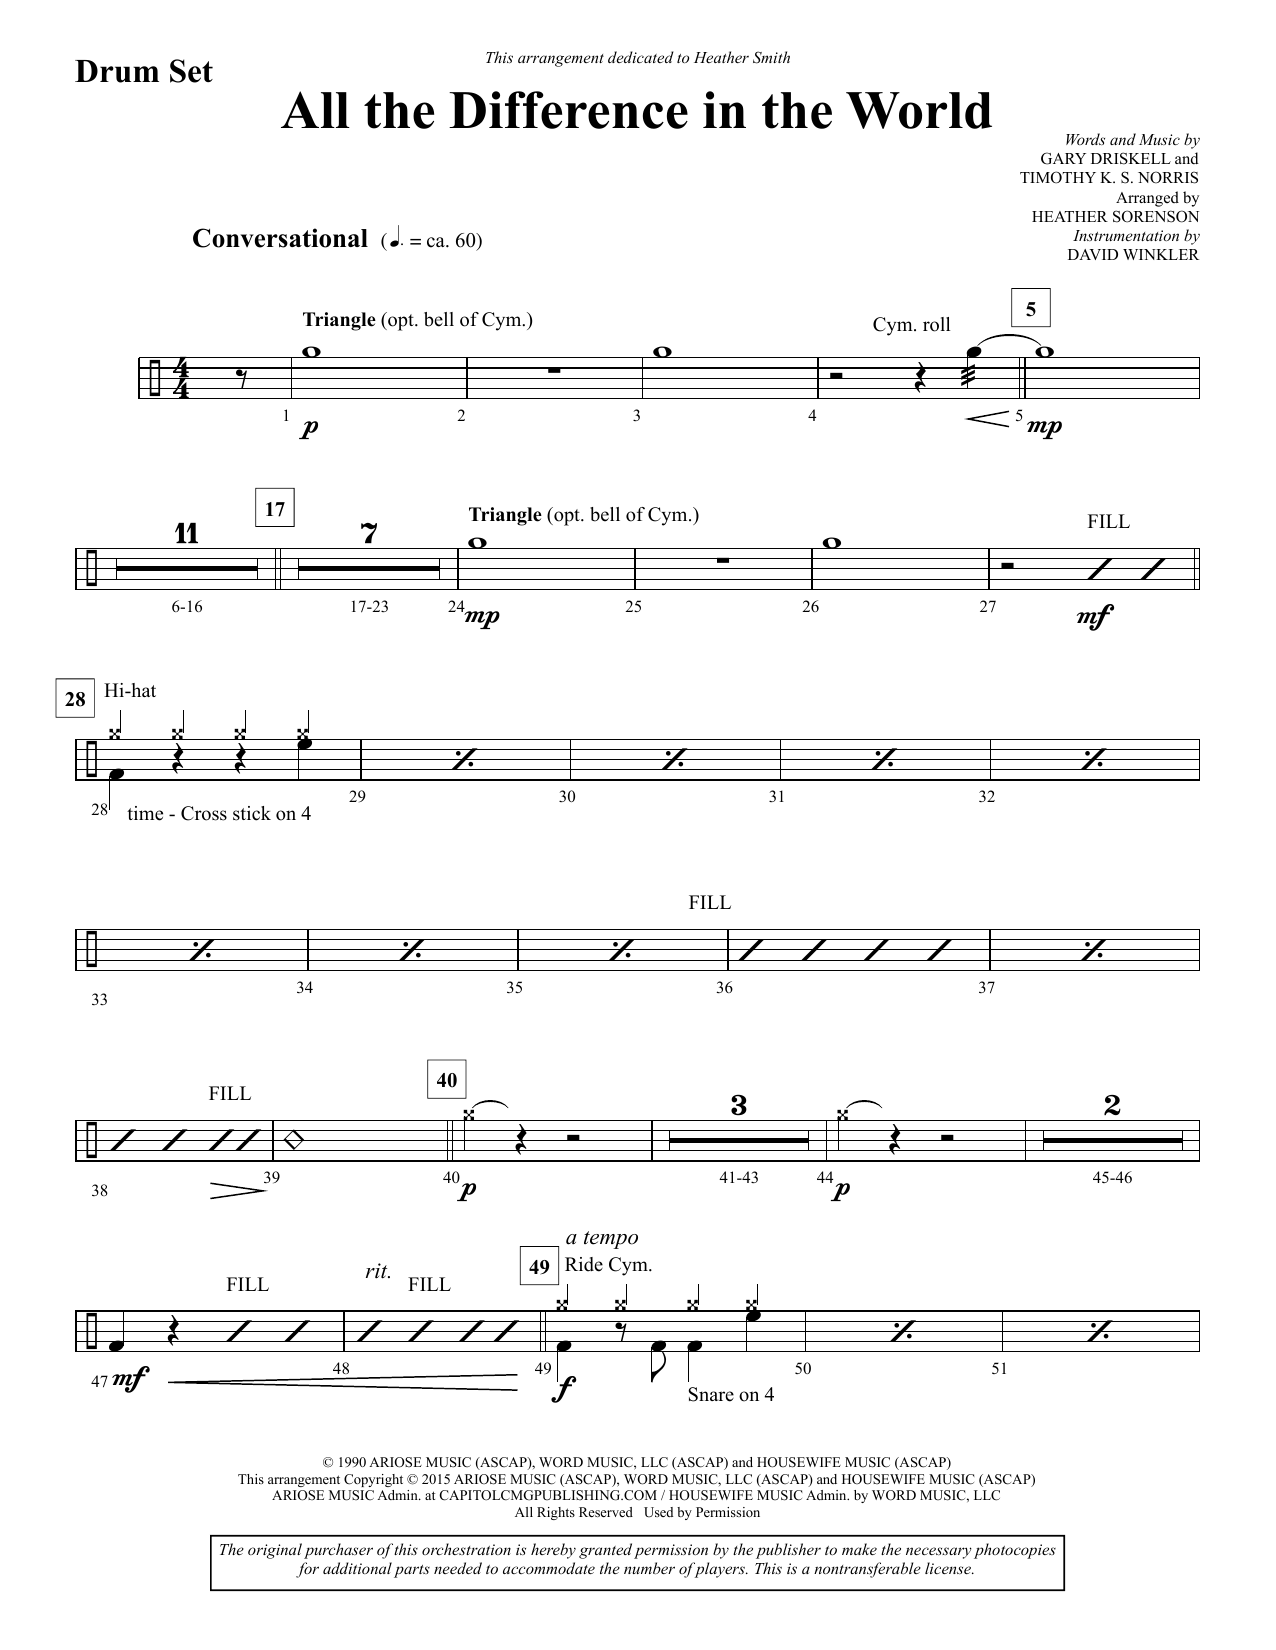 Heather Sorenson All the Difference in the World - Drums sheet music notes and chords. Download Printable PDF.